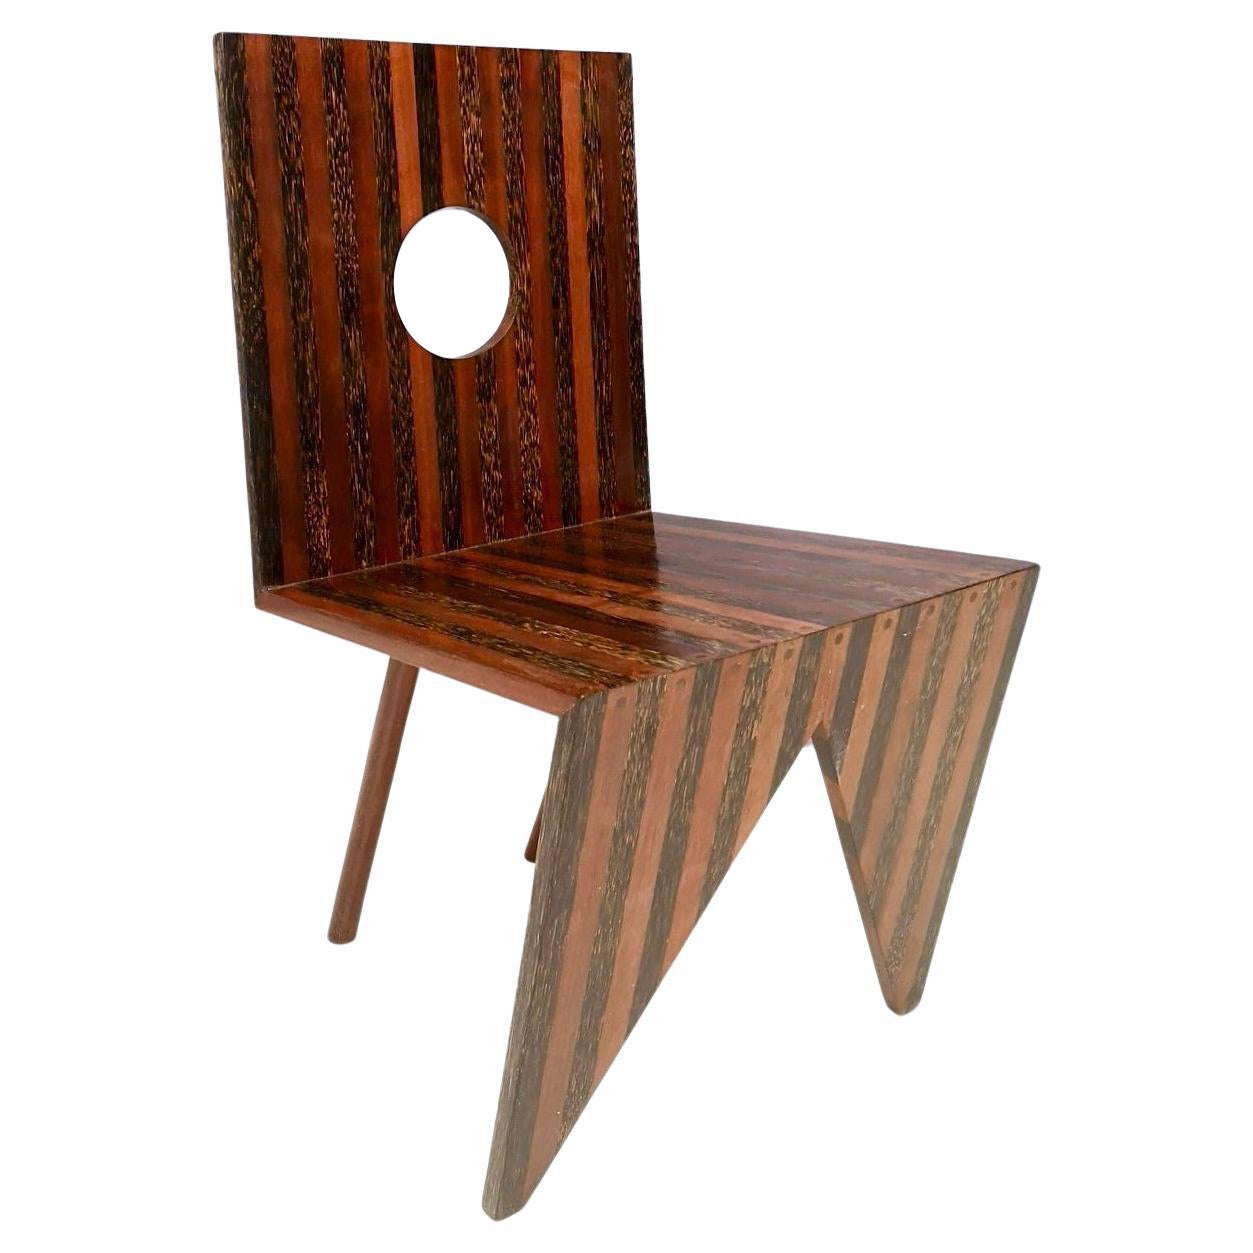 Postmodern Handmade Geometrical Solid Beech and Walnut Side Chair, Italy 1980s For Sale